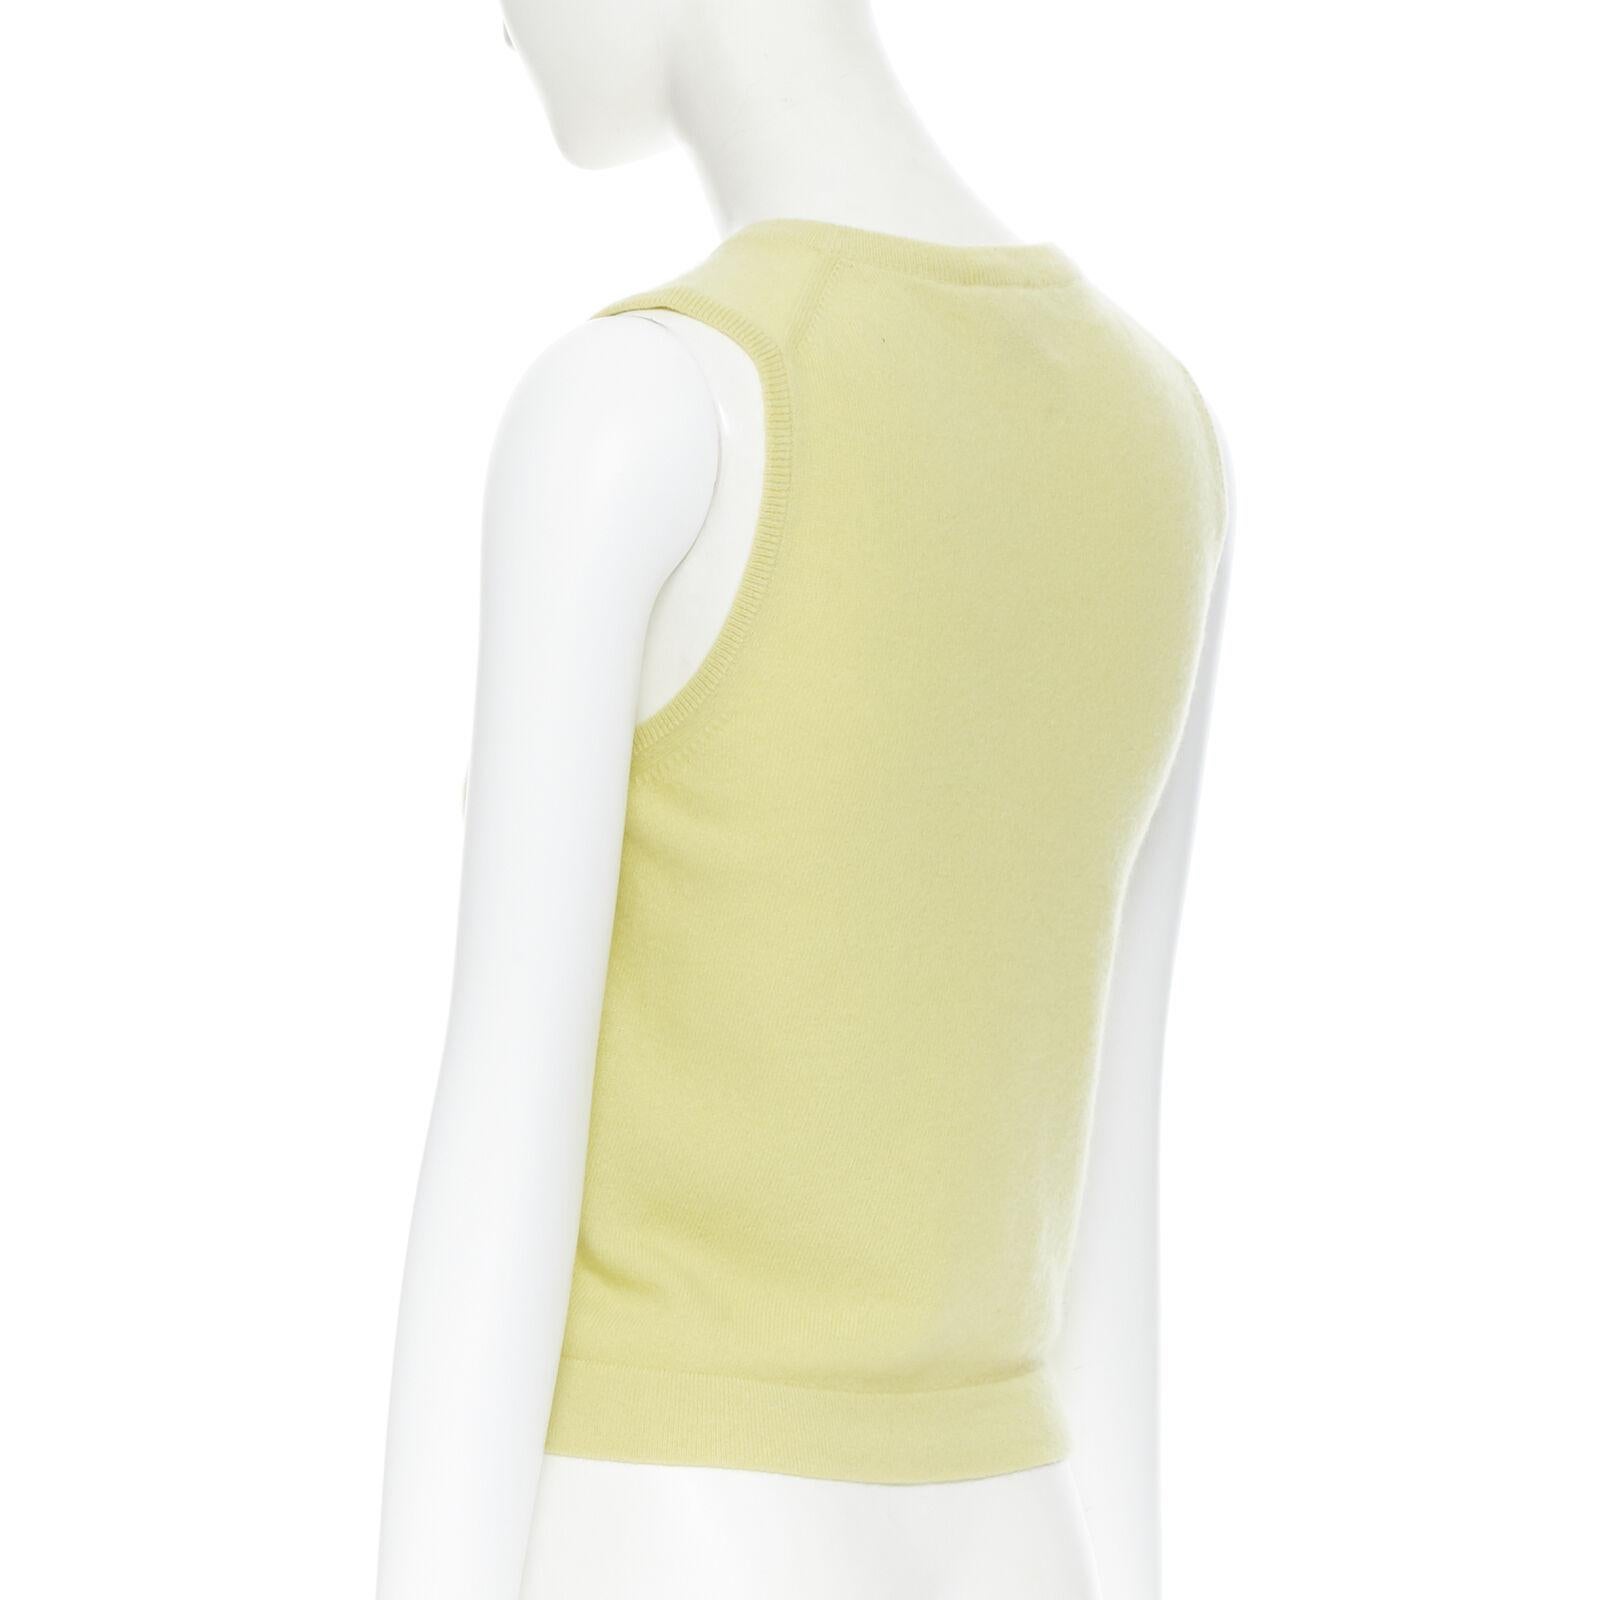 Women's vintage HERMES 100% pure cashmere yellow knitted short sleeveless vest sweater S